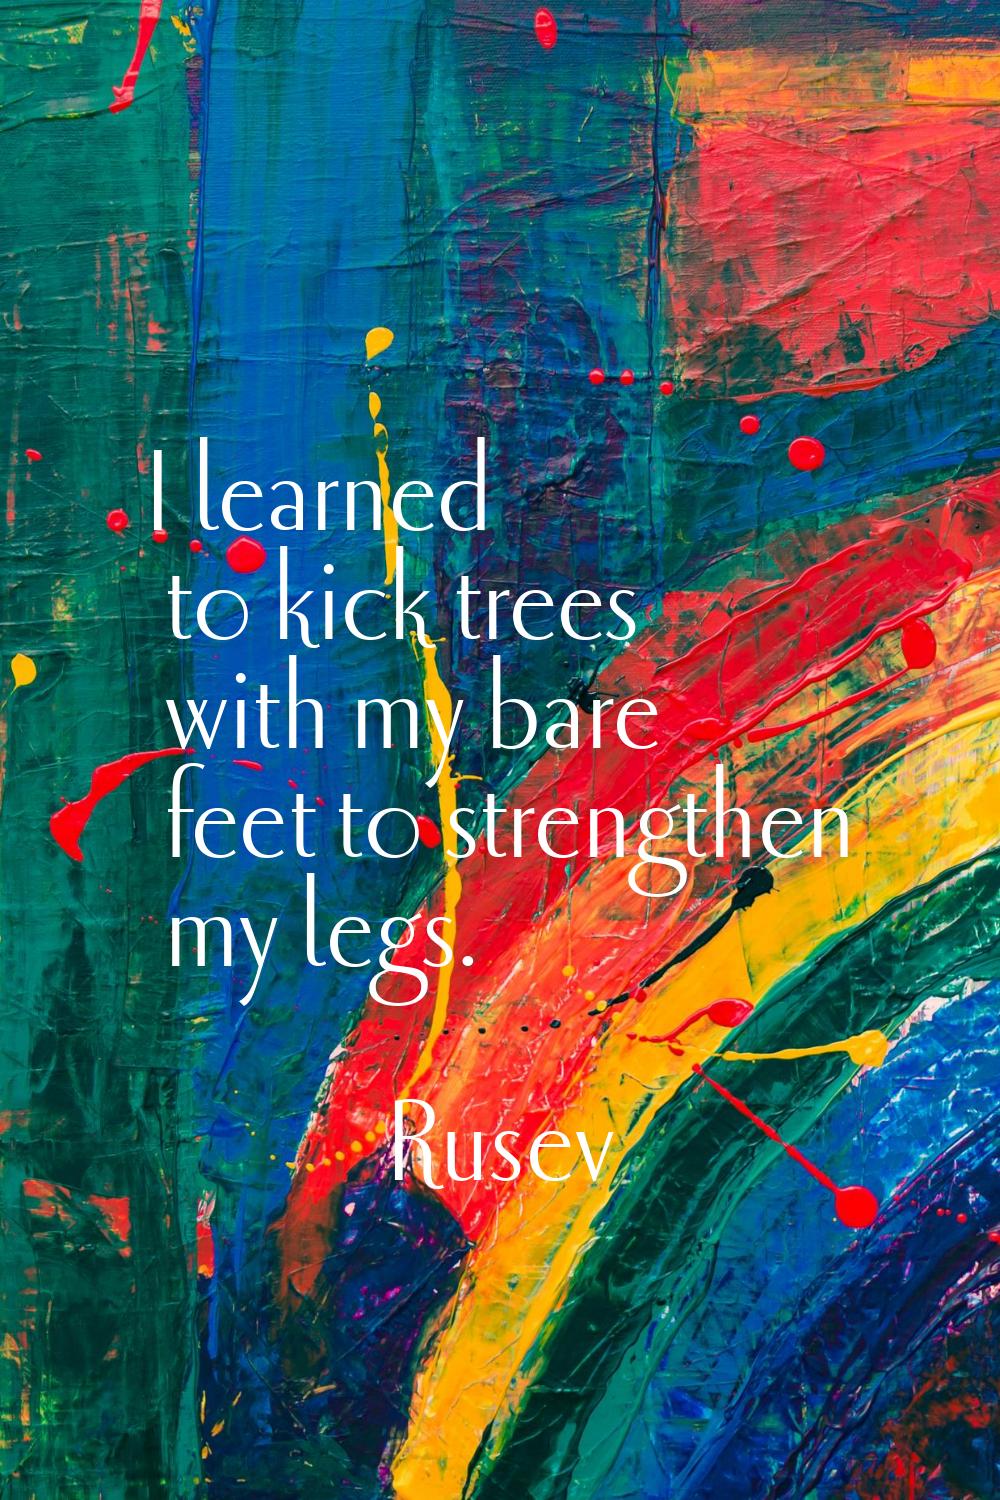 I learned to kick trees with my bare feet to strengthen my legs.